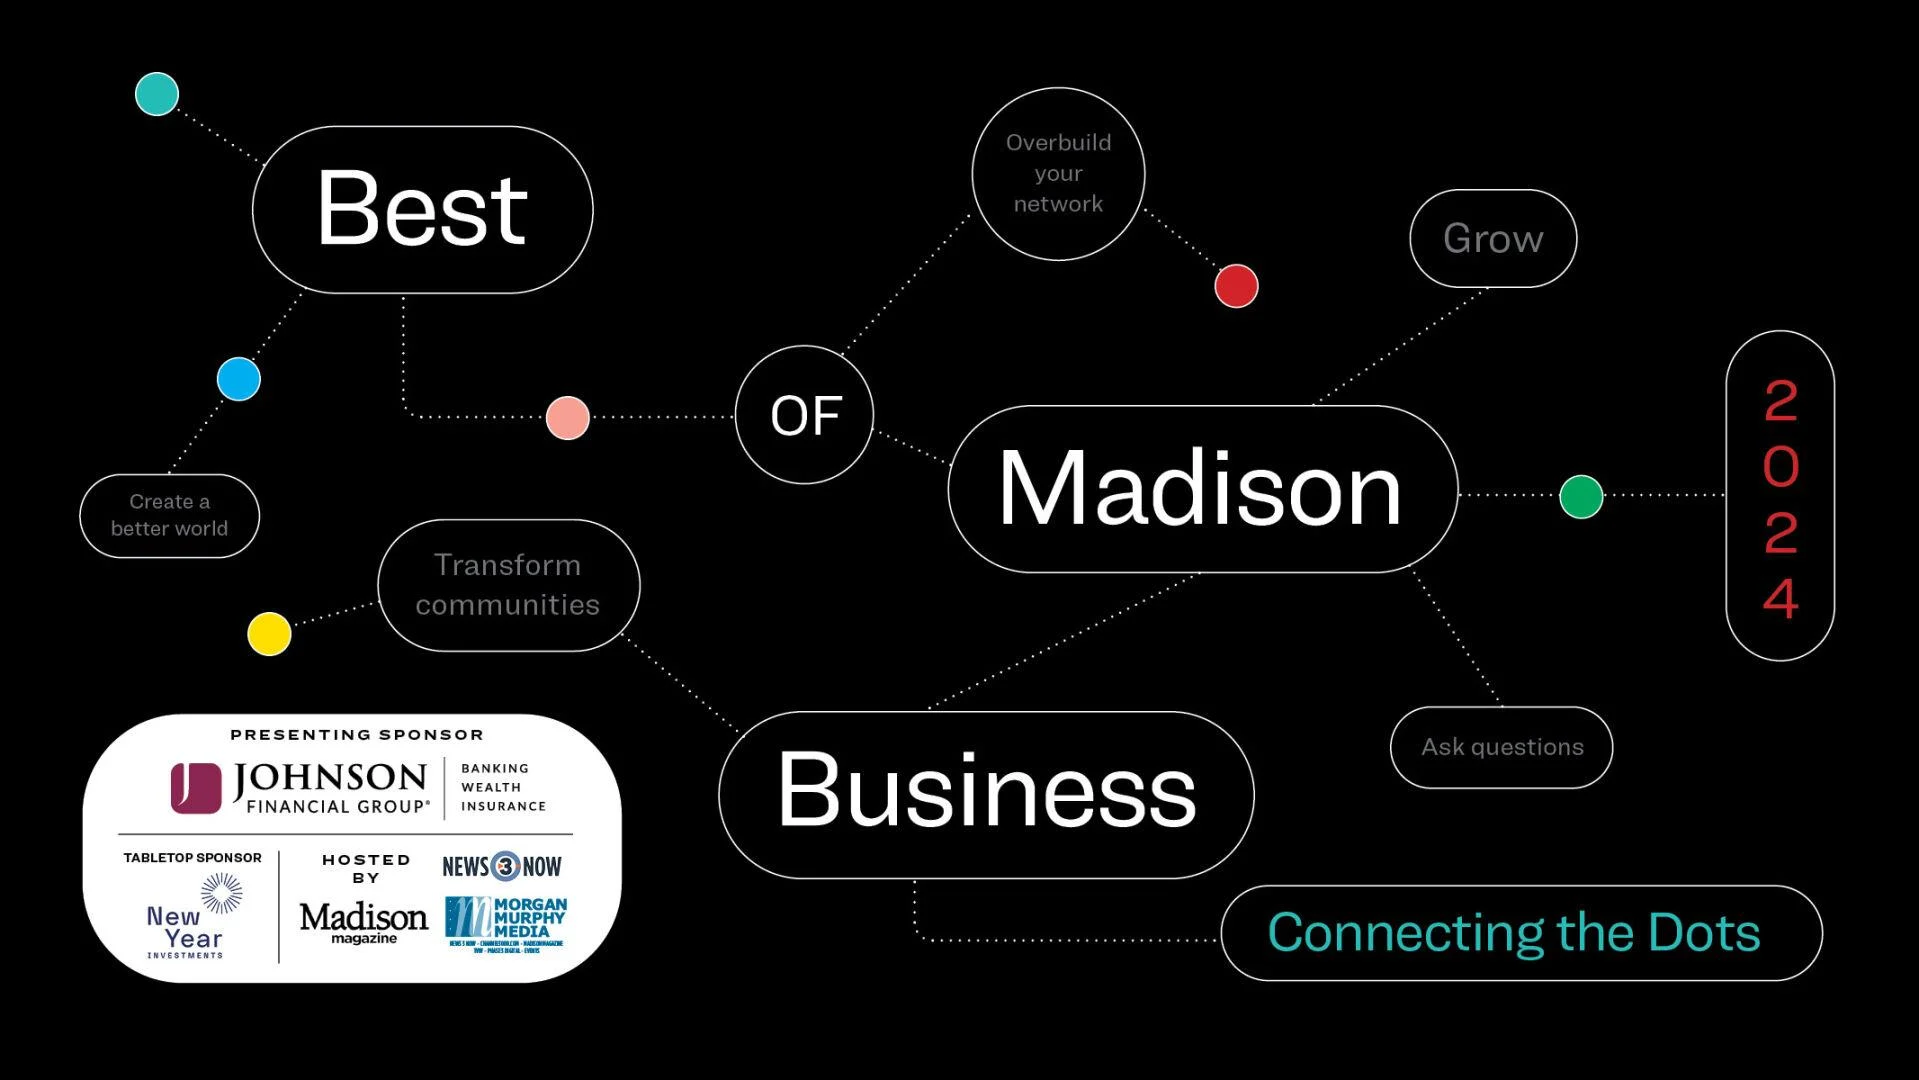 Best of Madison Business Graphic